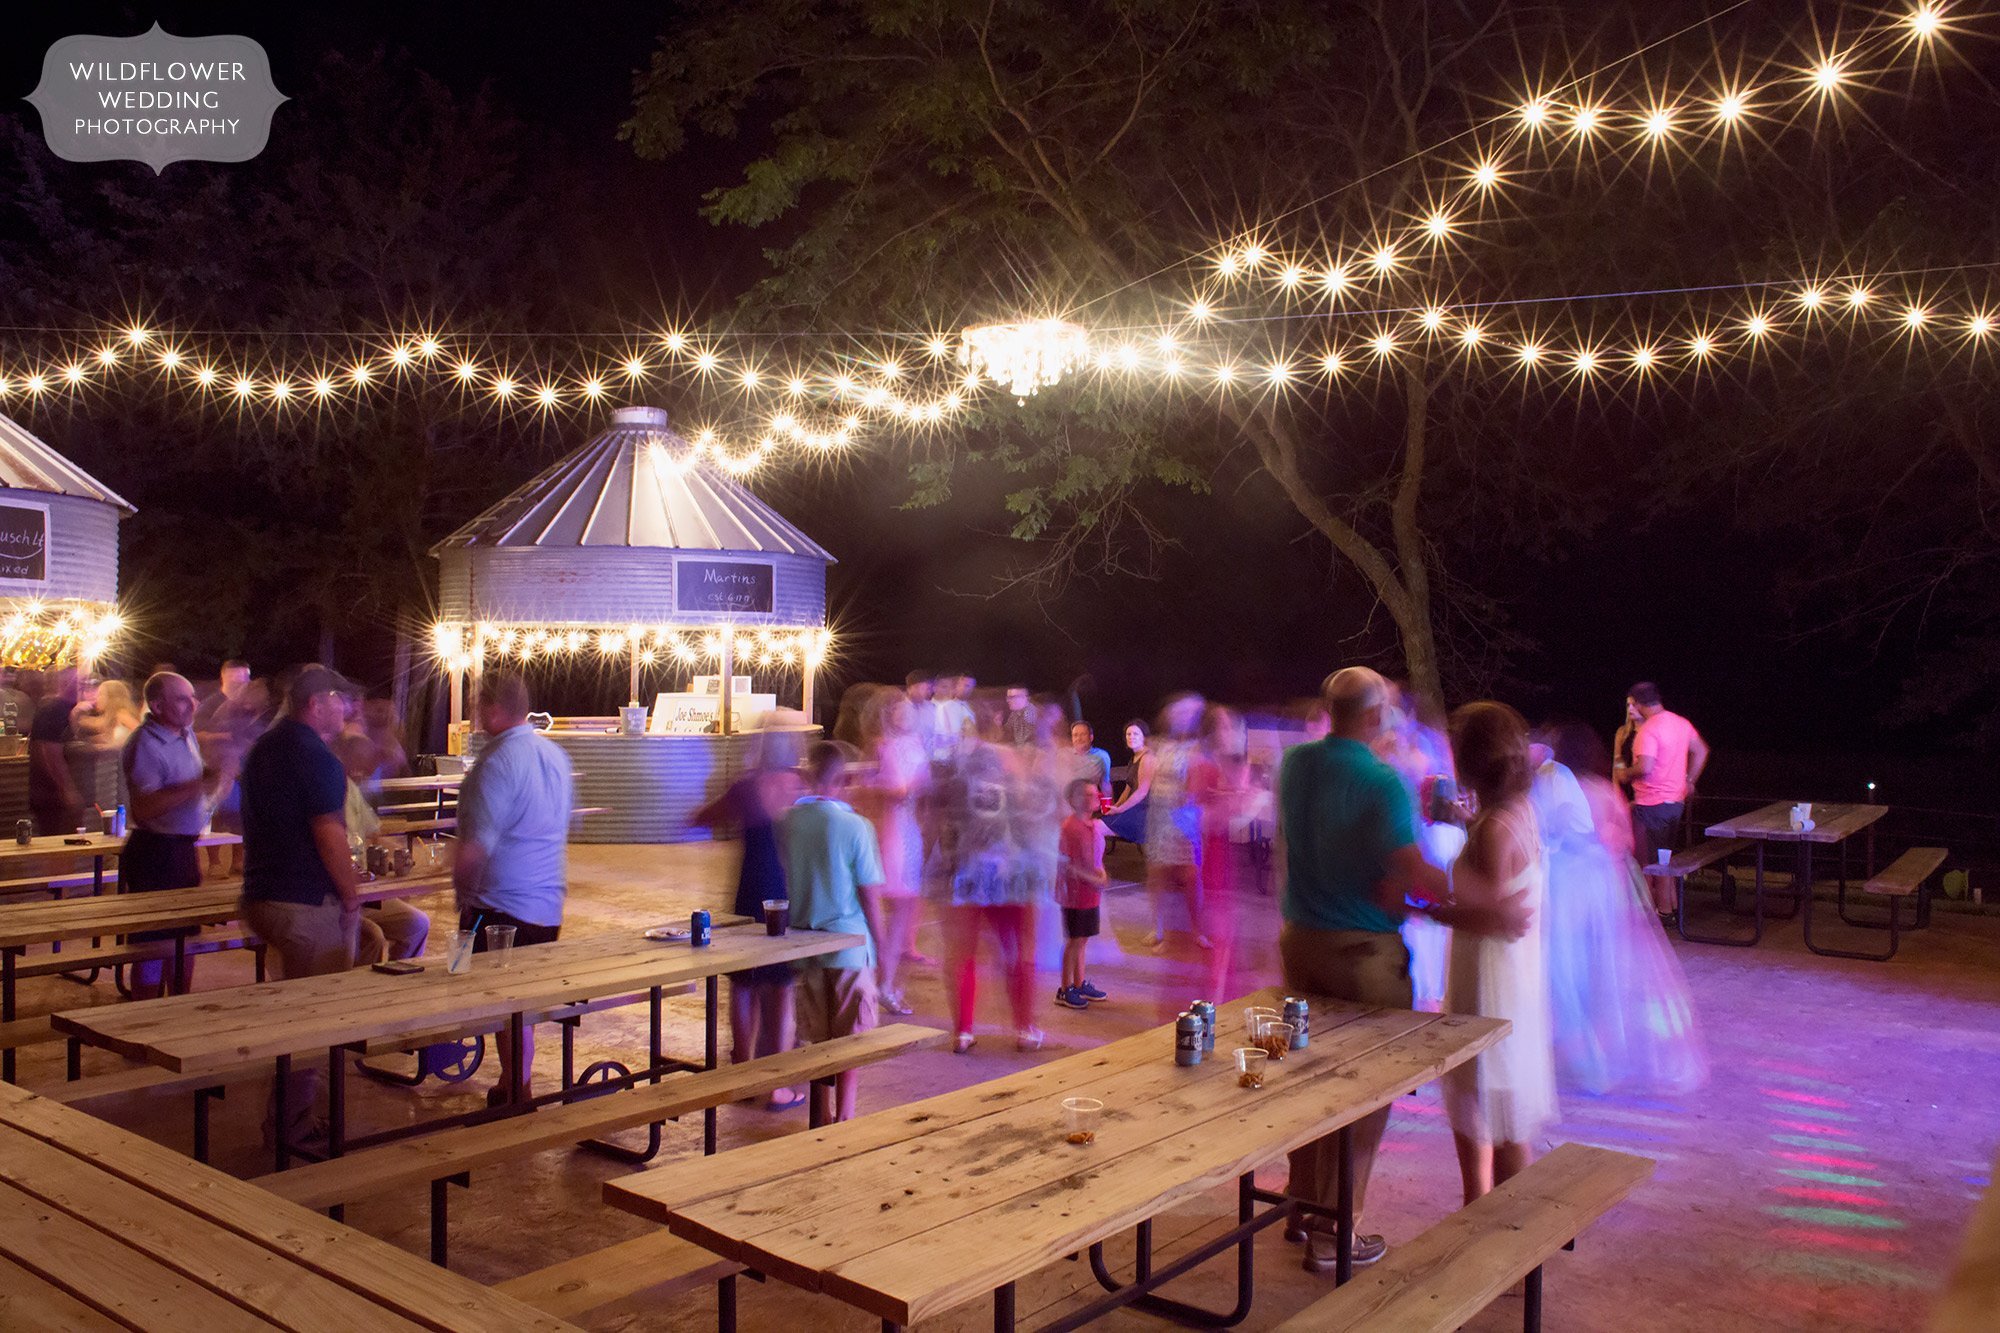 Outdoor dance floor at this country barn wedding venue in southern MO at Kempker's Back 40 barn.